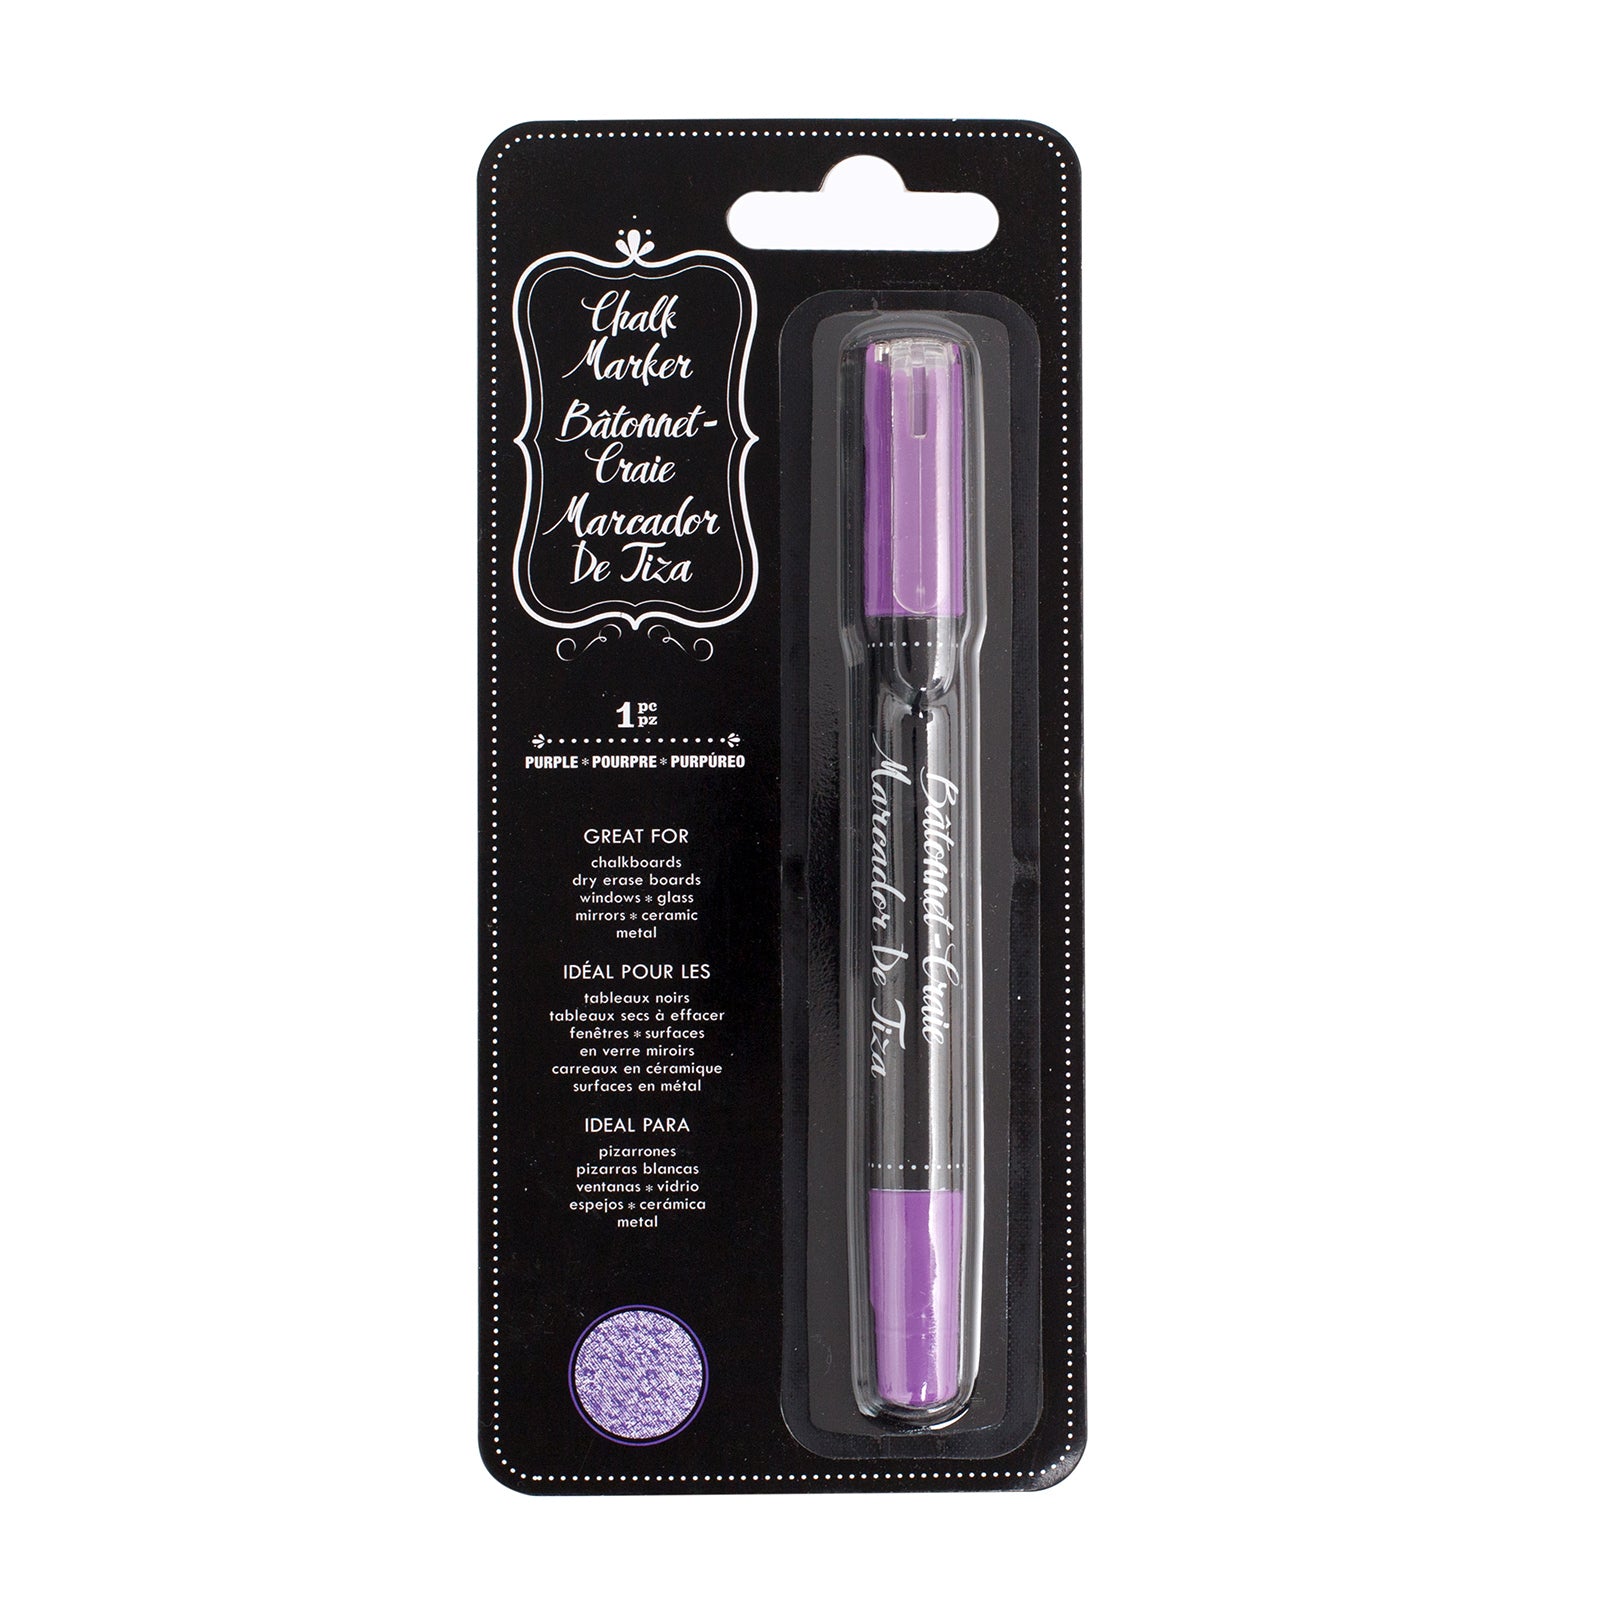 Chalk Markers for Chalk boards, glass and dry erase boards